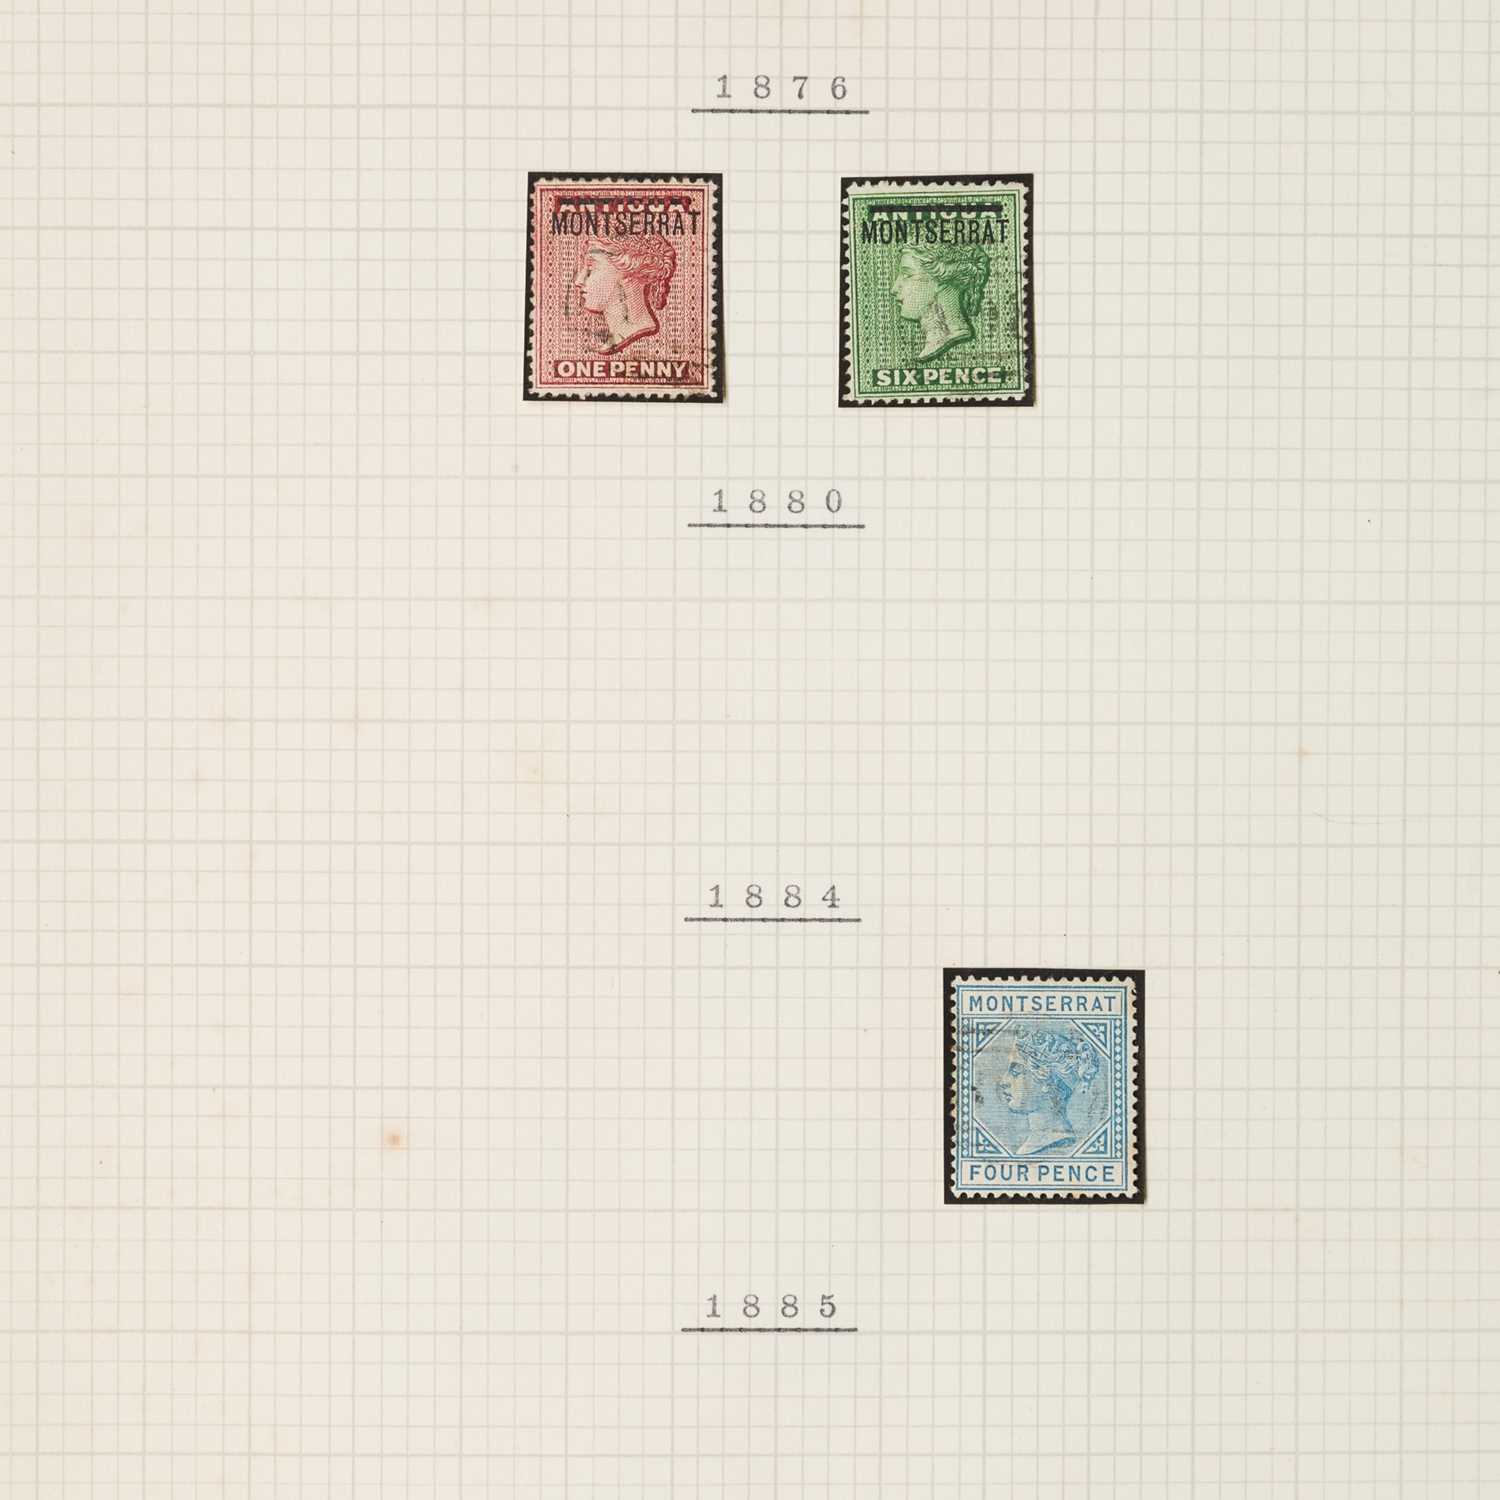 Lot 1003 - British West Indies Classic Stamp Group